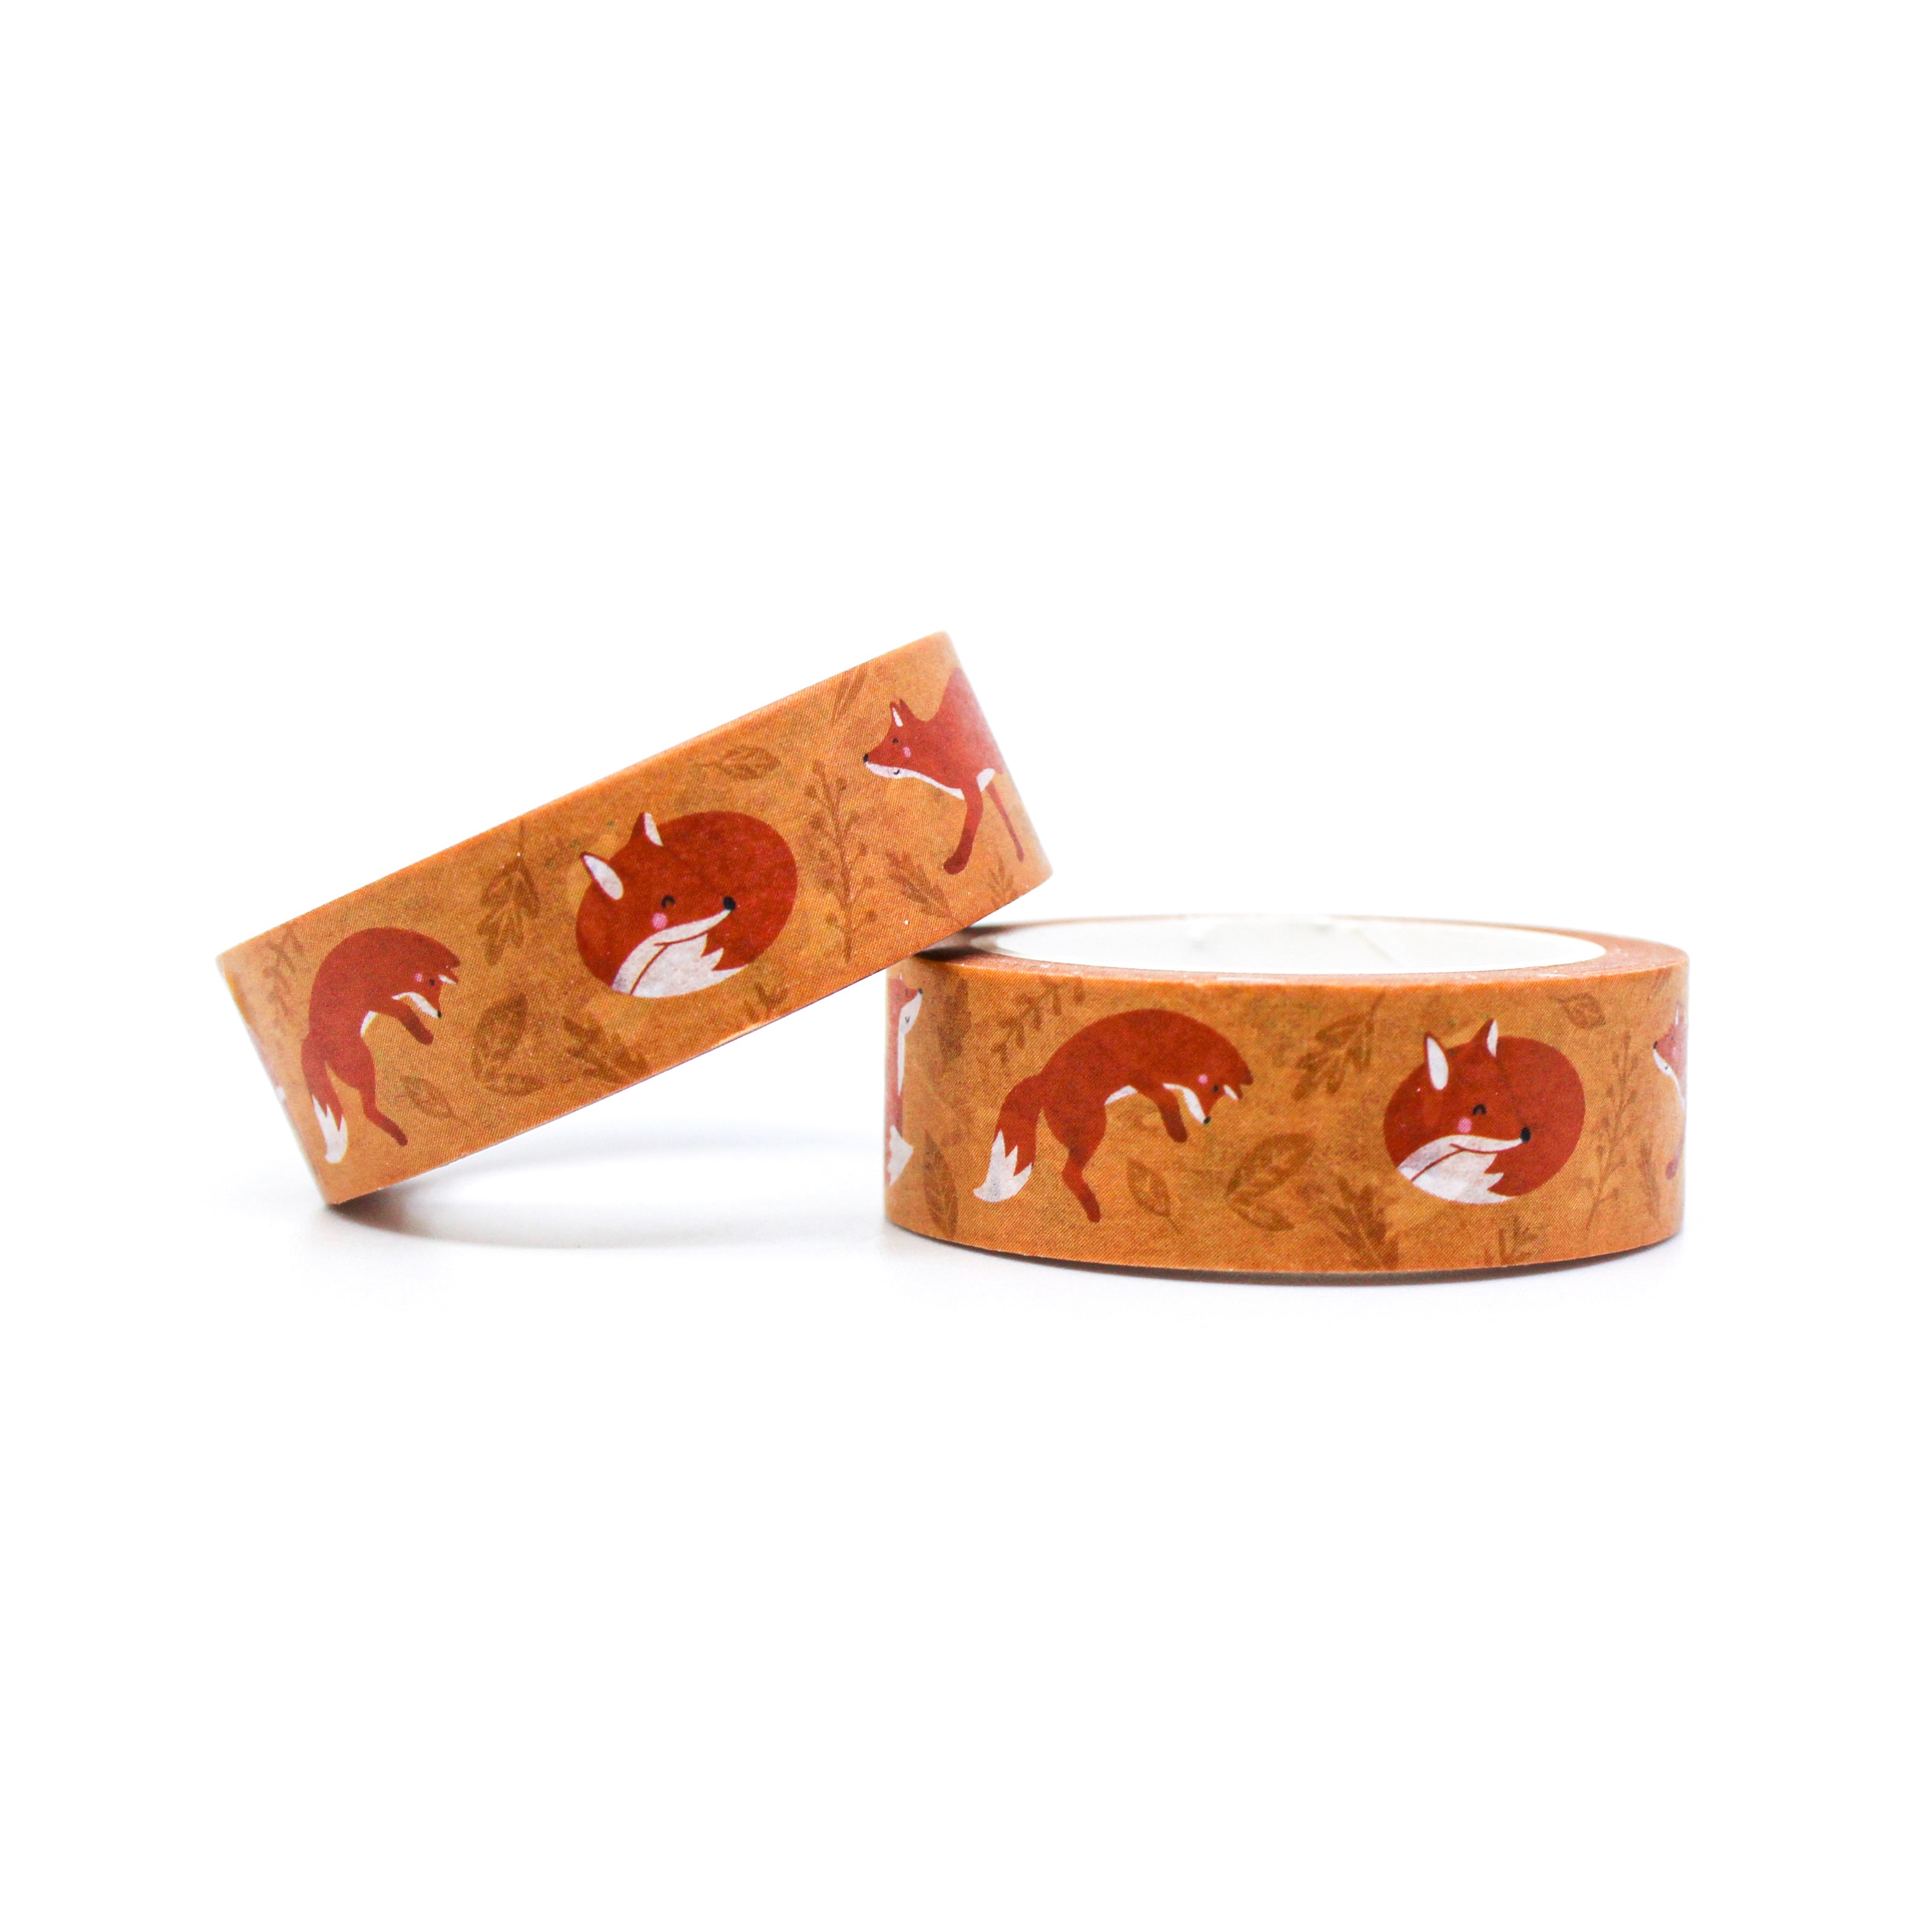 This is a roll of orange autumn woodland creatures fox washi tapes from BBB Supplies Craft Shop